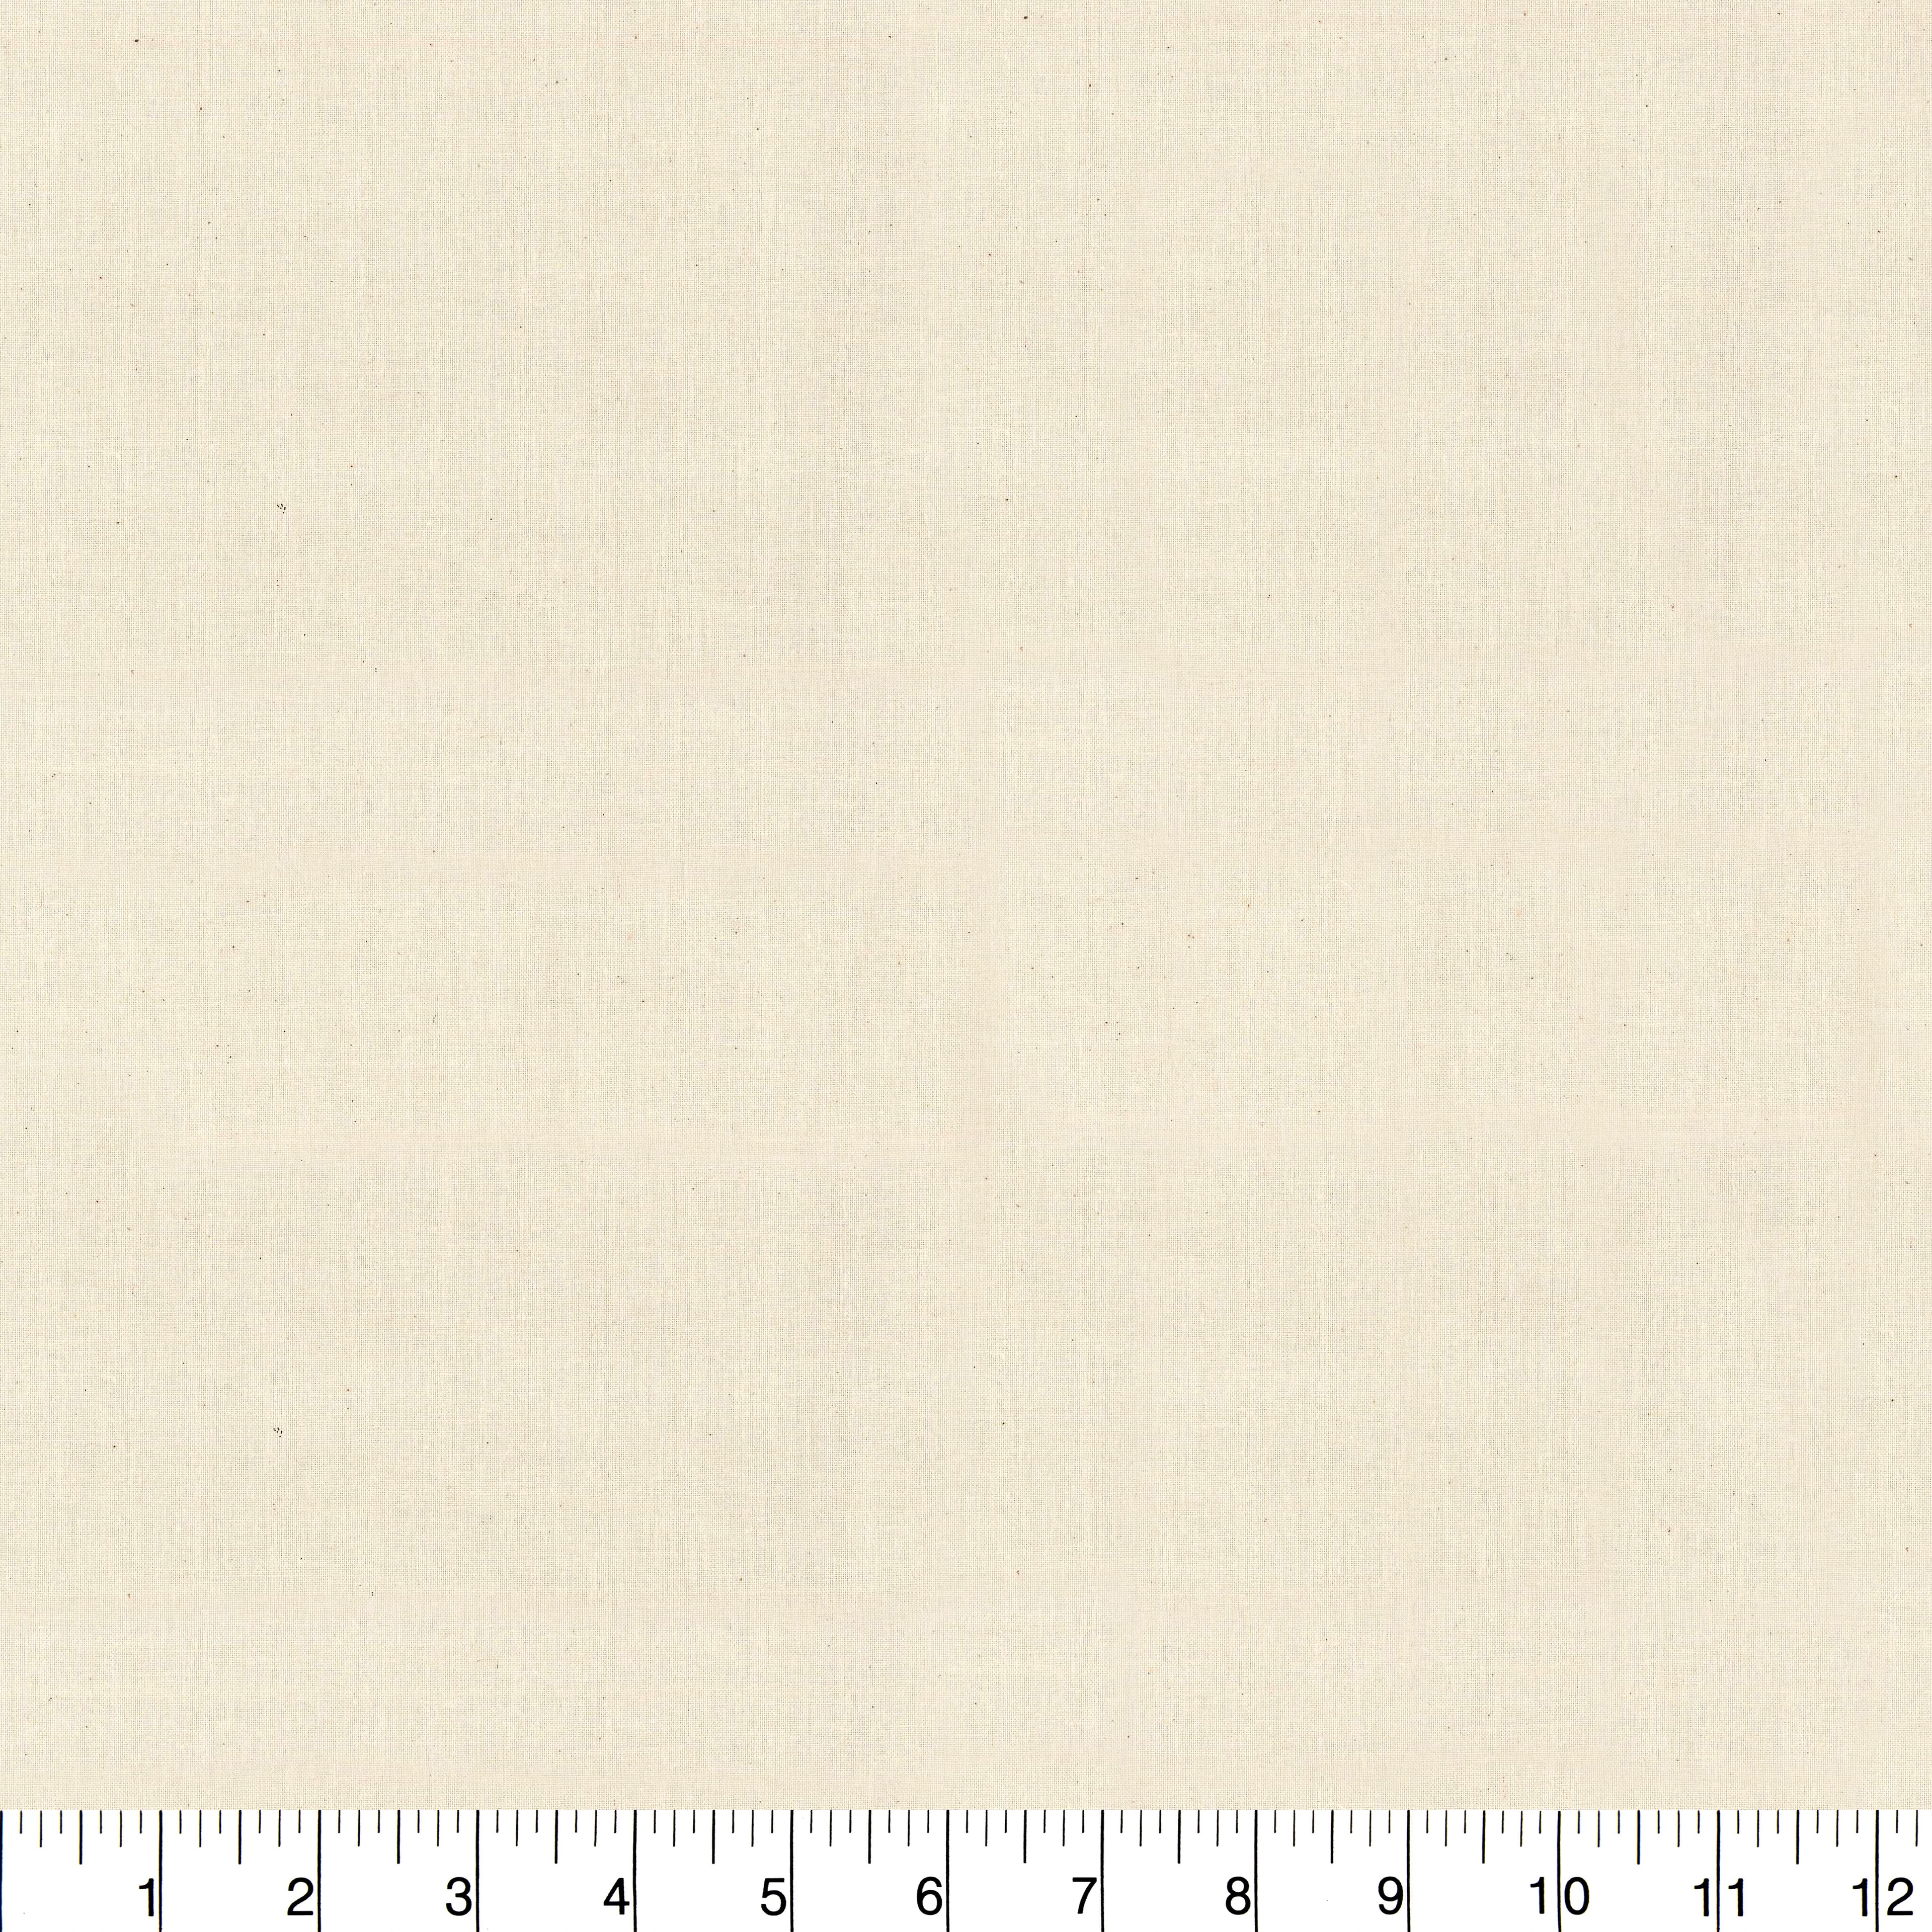 10 yd. Full Bolt: Fabric Traditions Off-White Unbleached Muslin Cotton Fabric